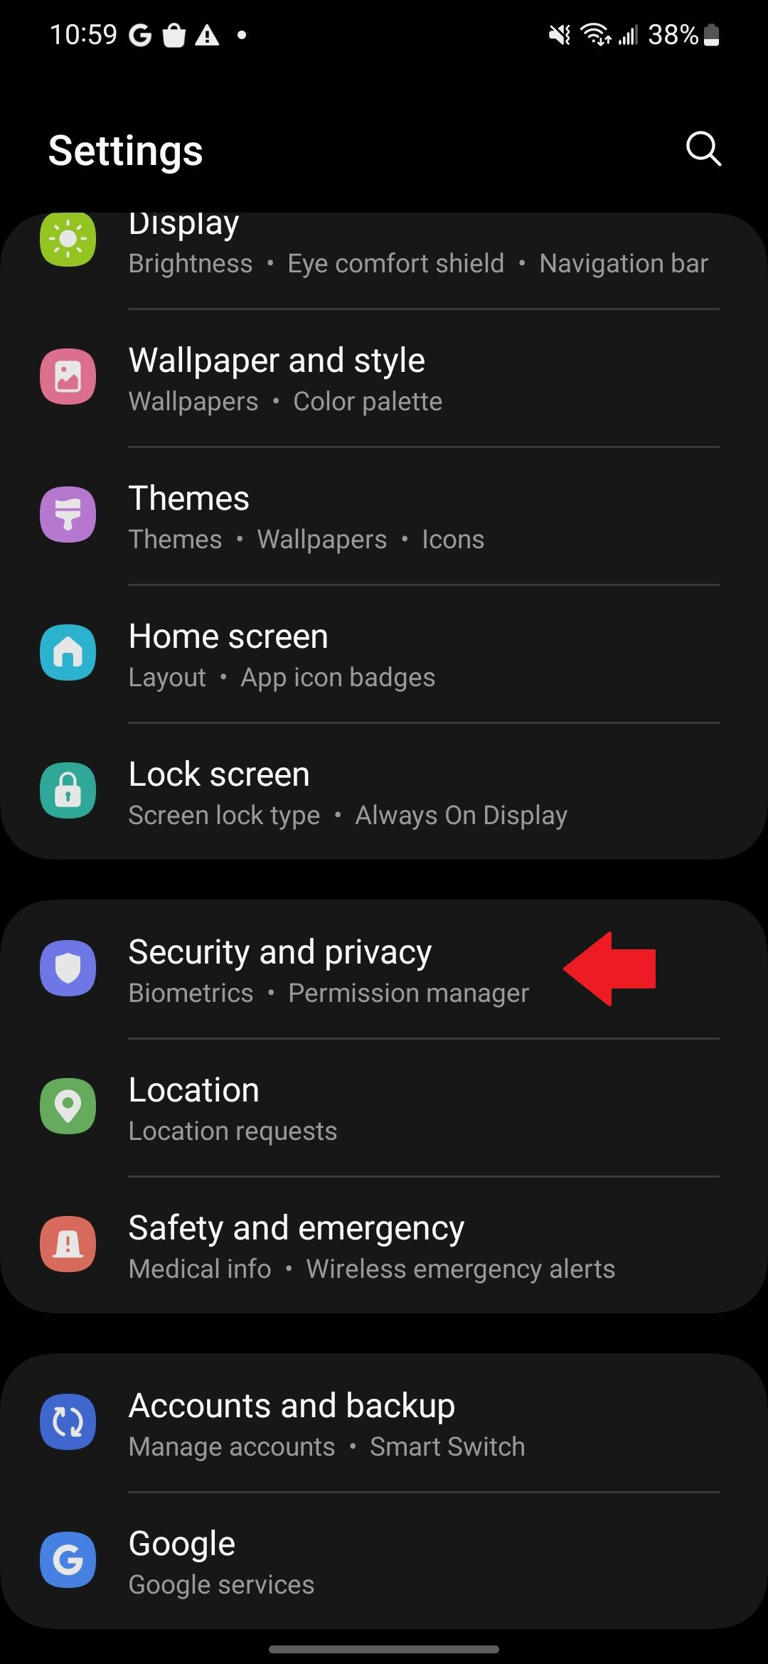 The Samsung Settings app with a red arrow pointing to the Security and privacy option